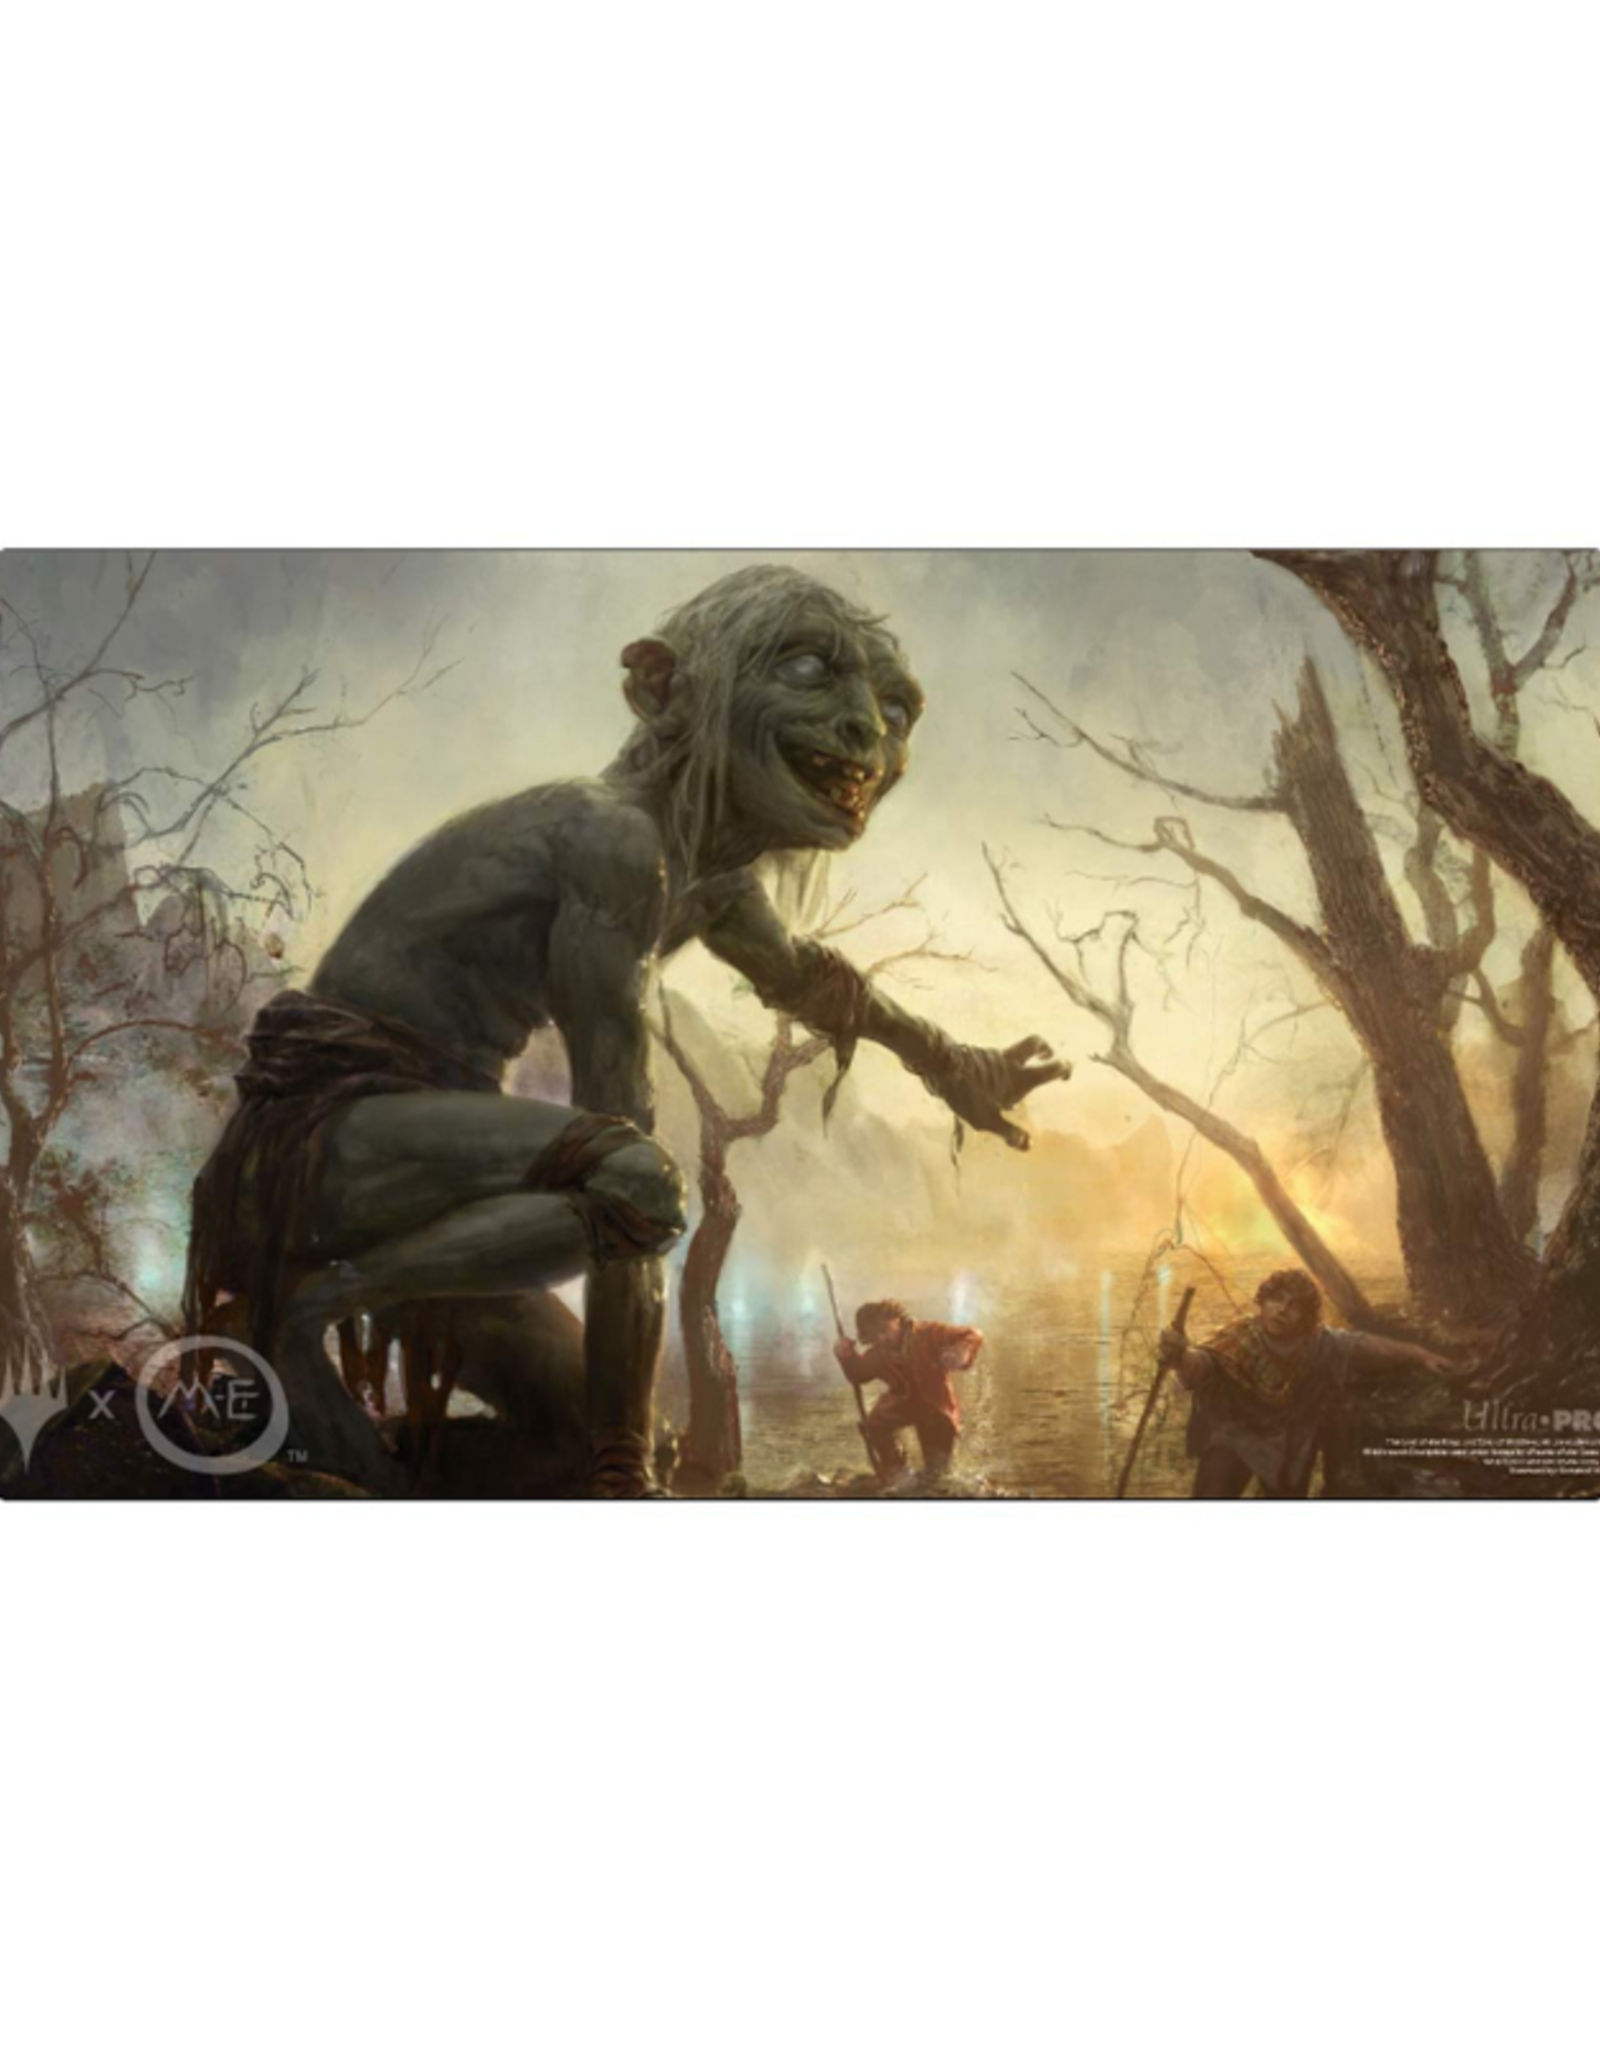 MTG Playmat: Tales of Middle-Earth - Smeagol